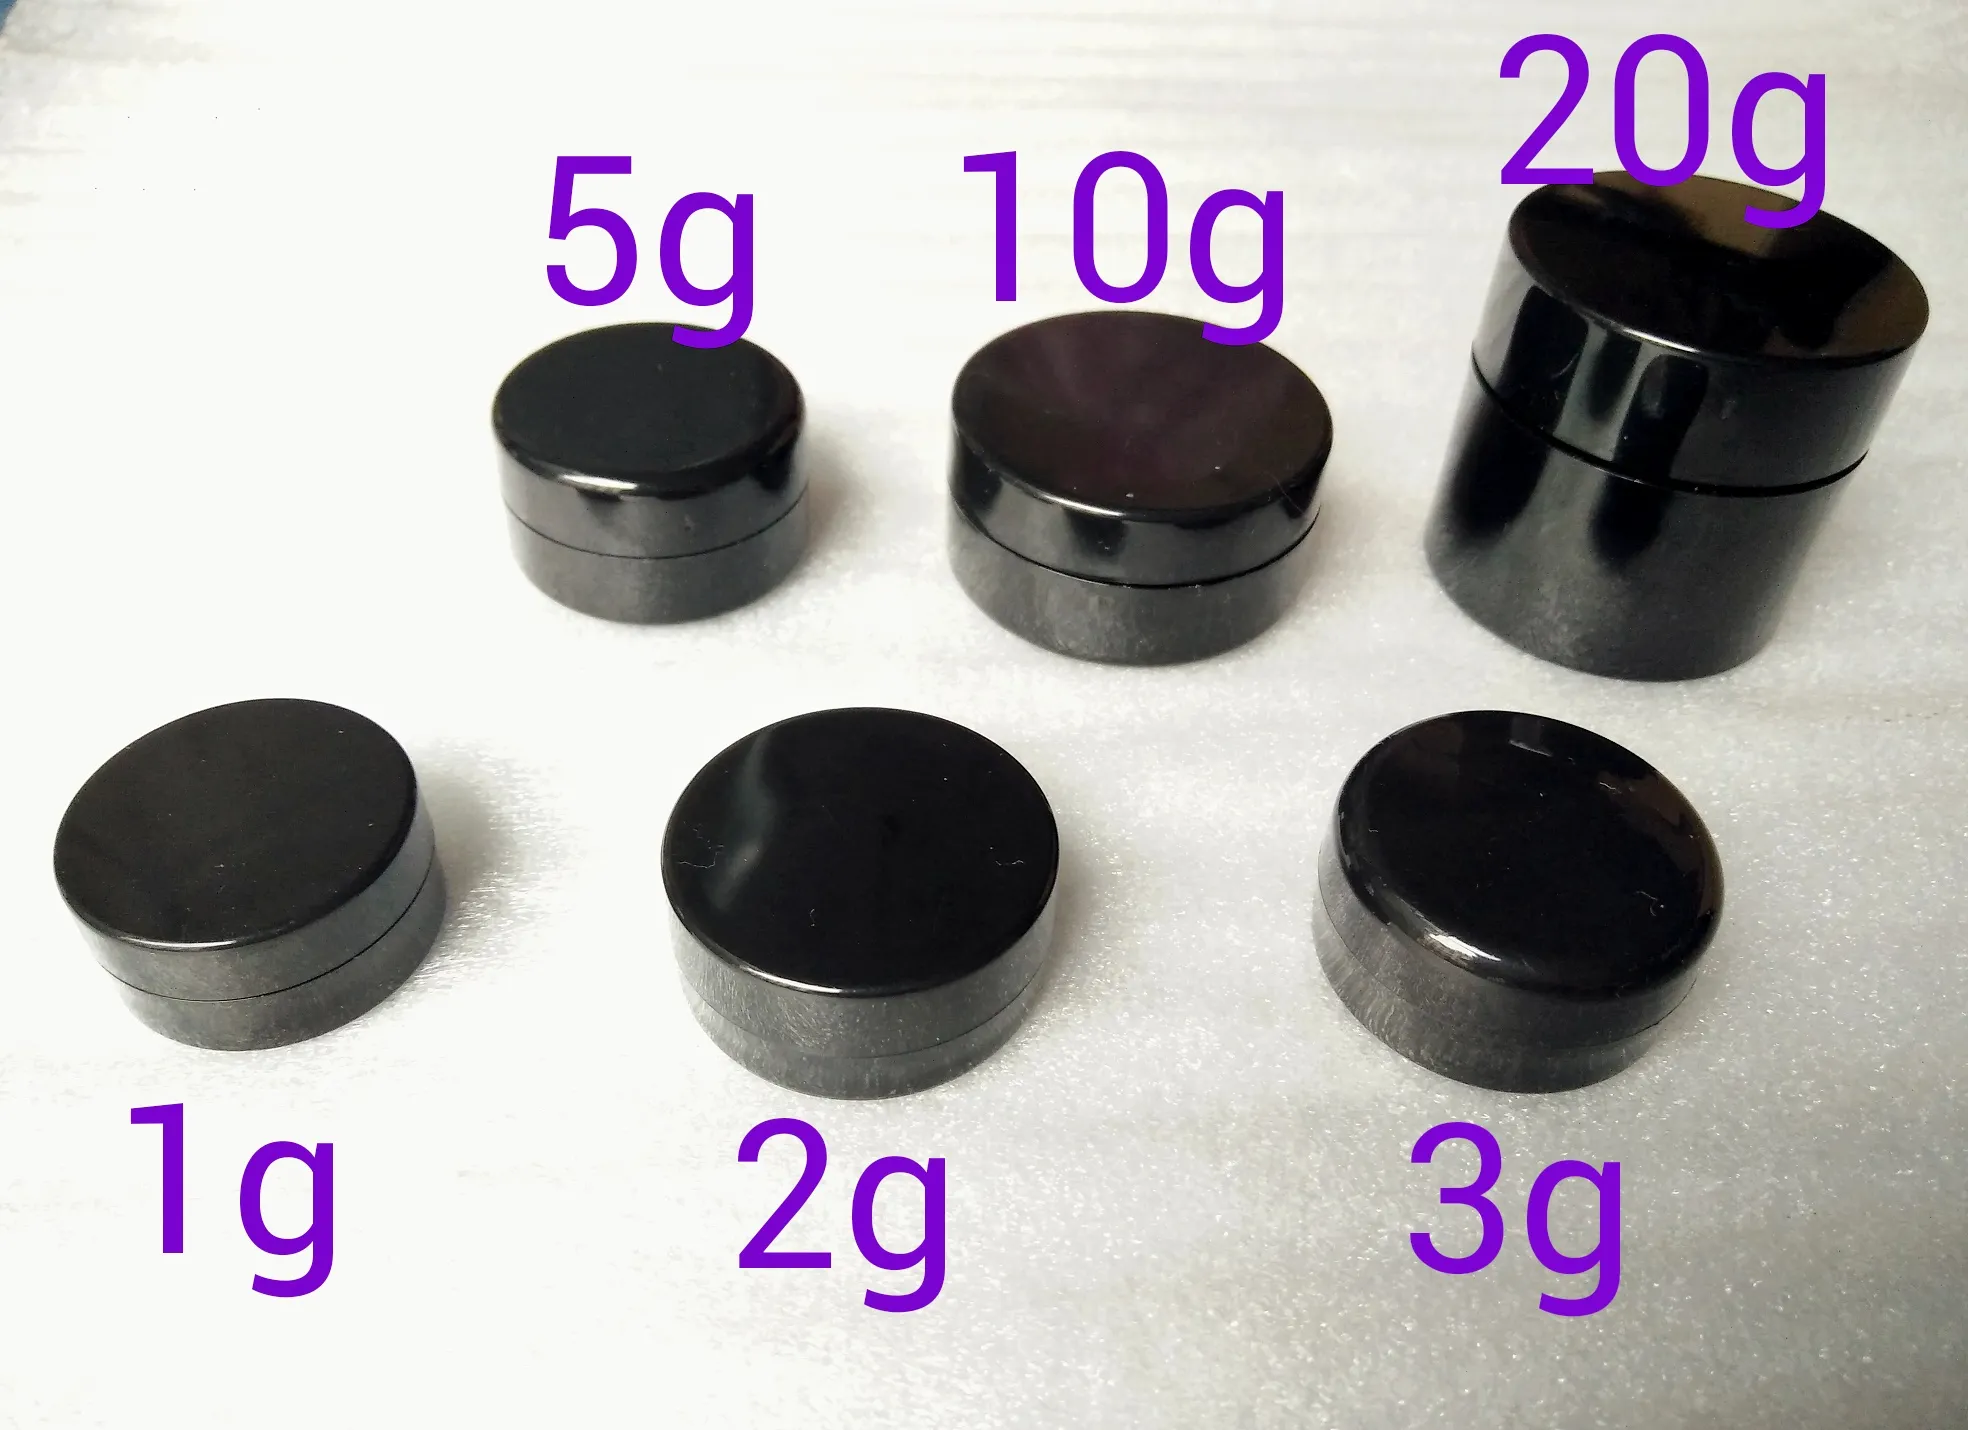 3Gram Cosmetic Sample Empty Jar Plastic Round Pot Black Screw Cap Lid, Small Tiny 3g Bottle, for Make Up, Eye Shadow, Nails, Powder, Paint